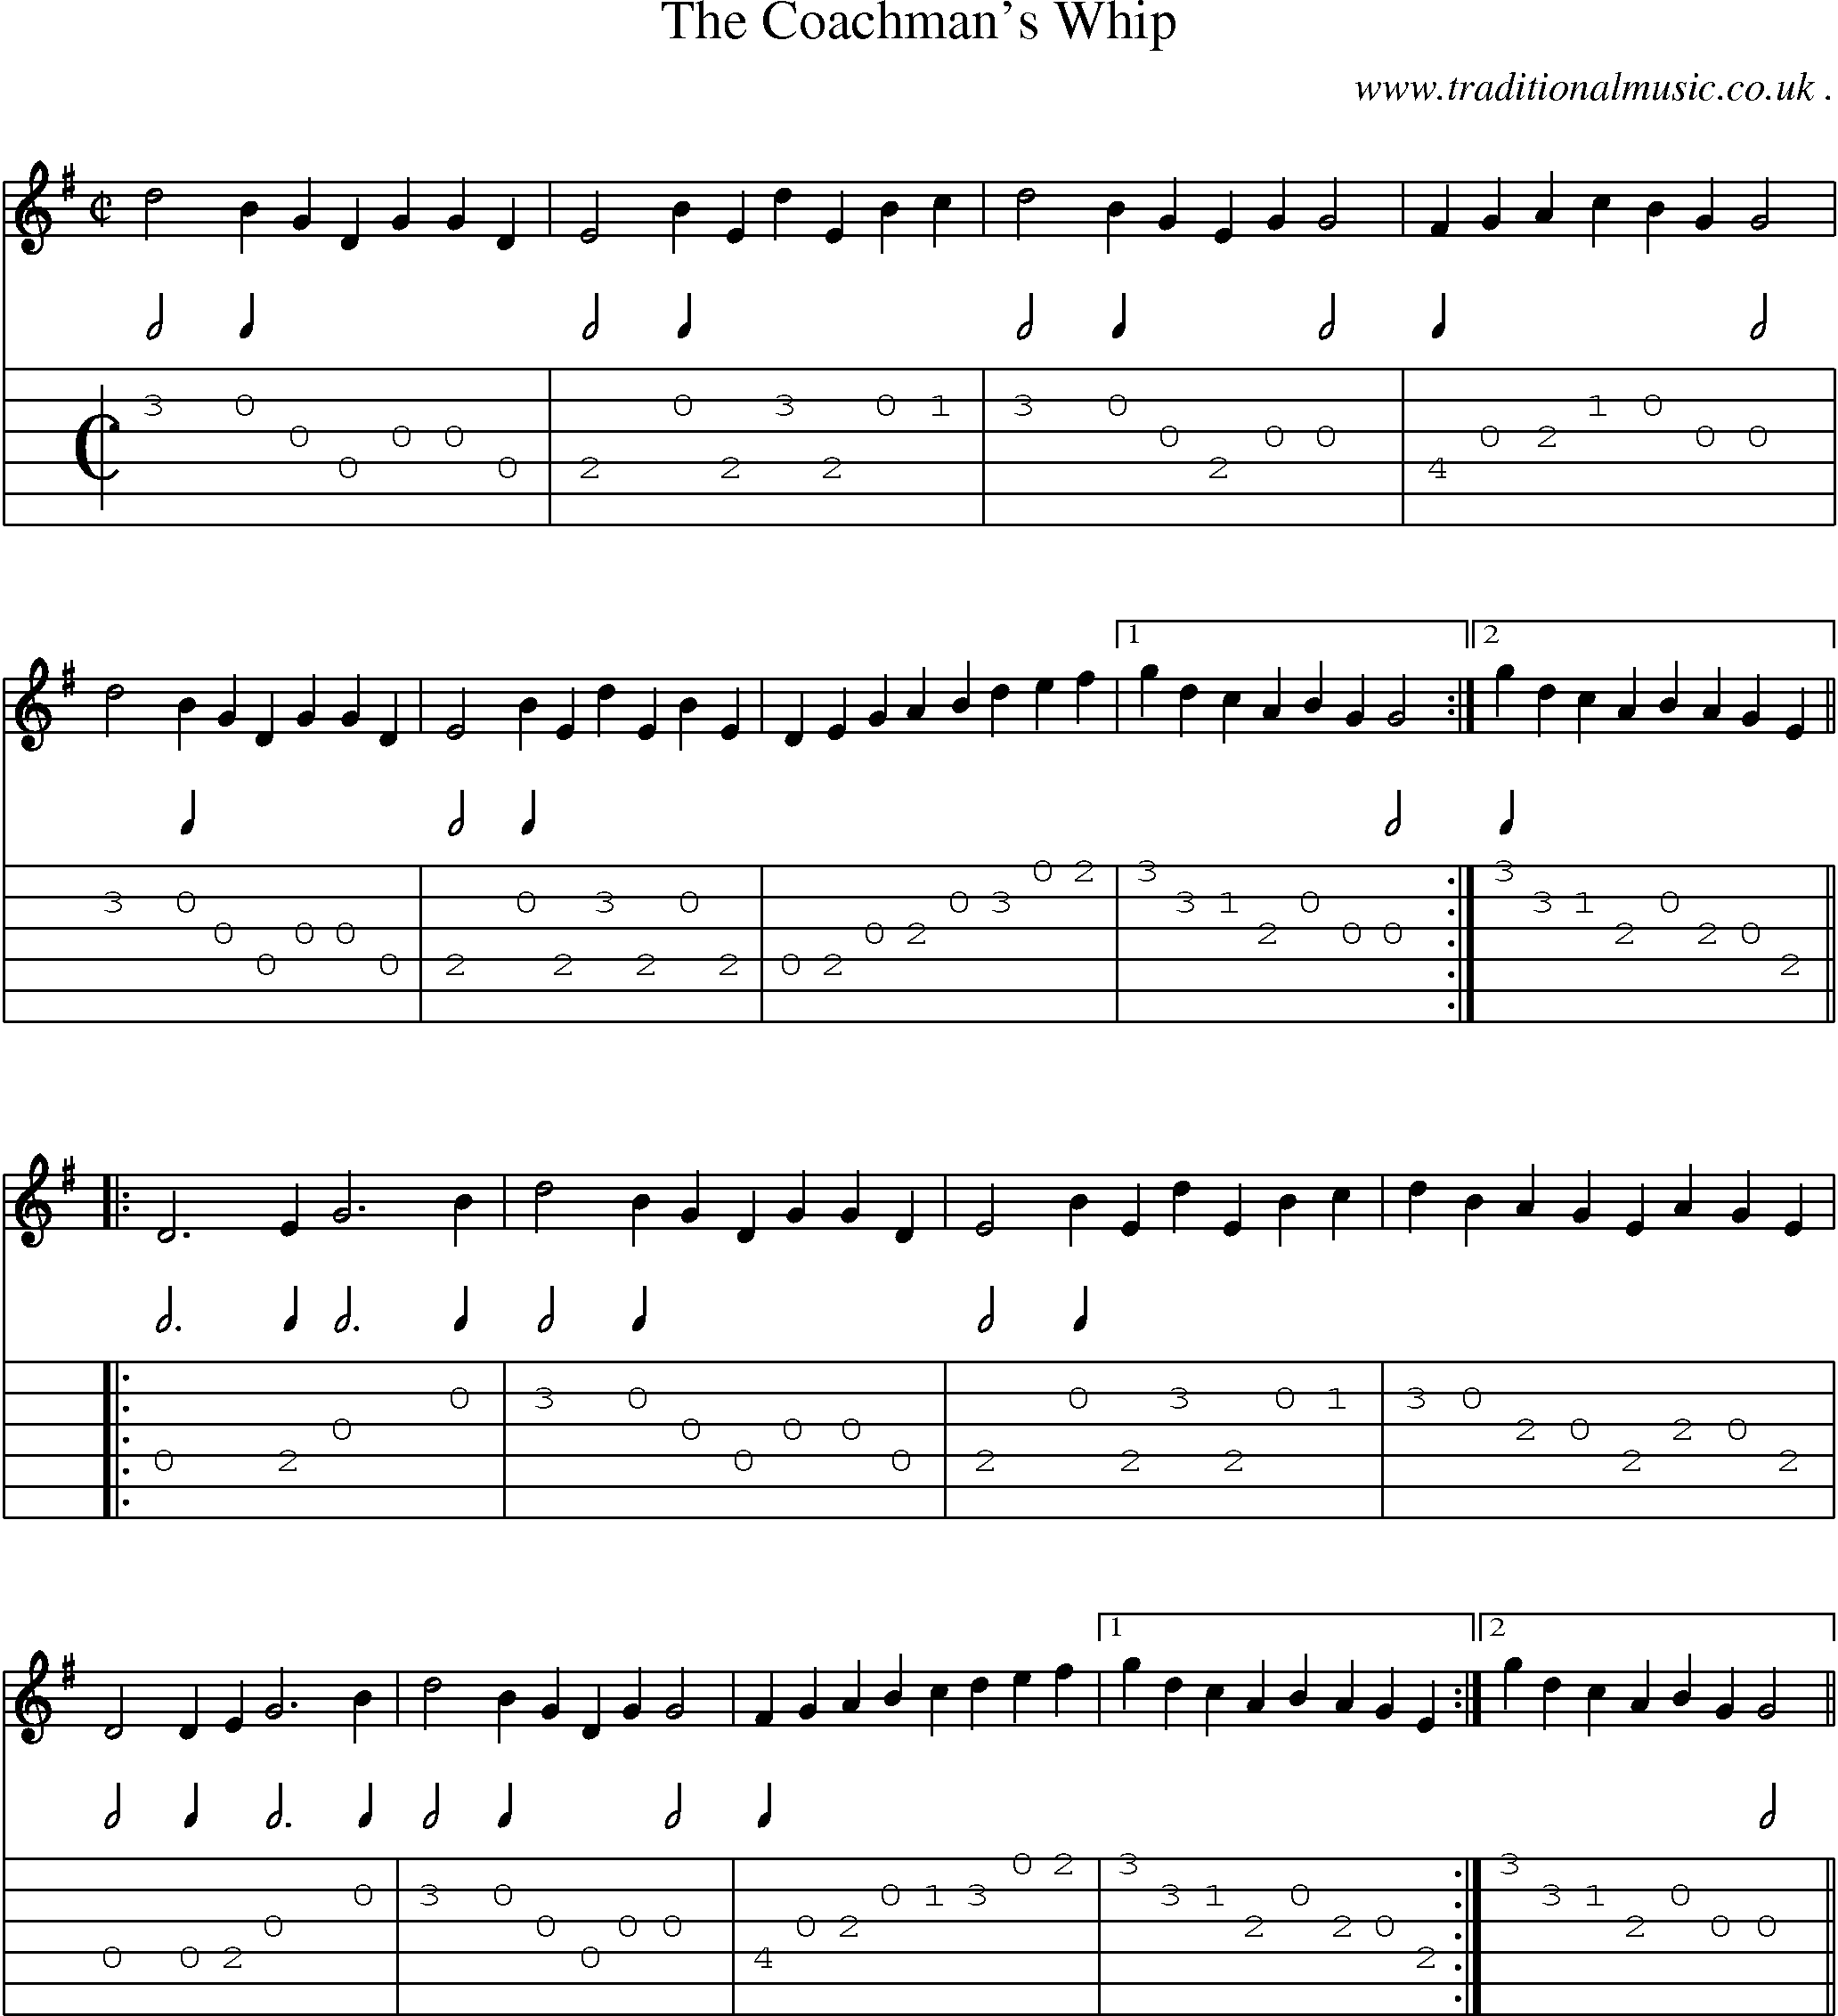 Sheet-Music and Guitar Tabs for The Coachmans Whip